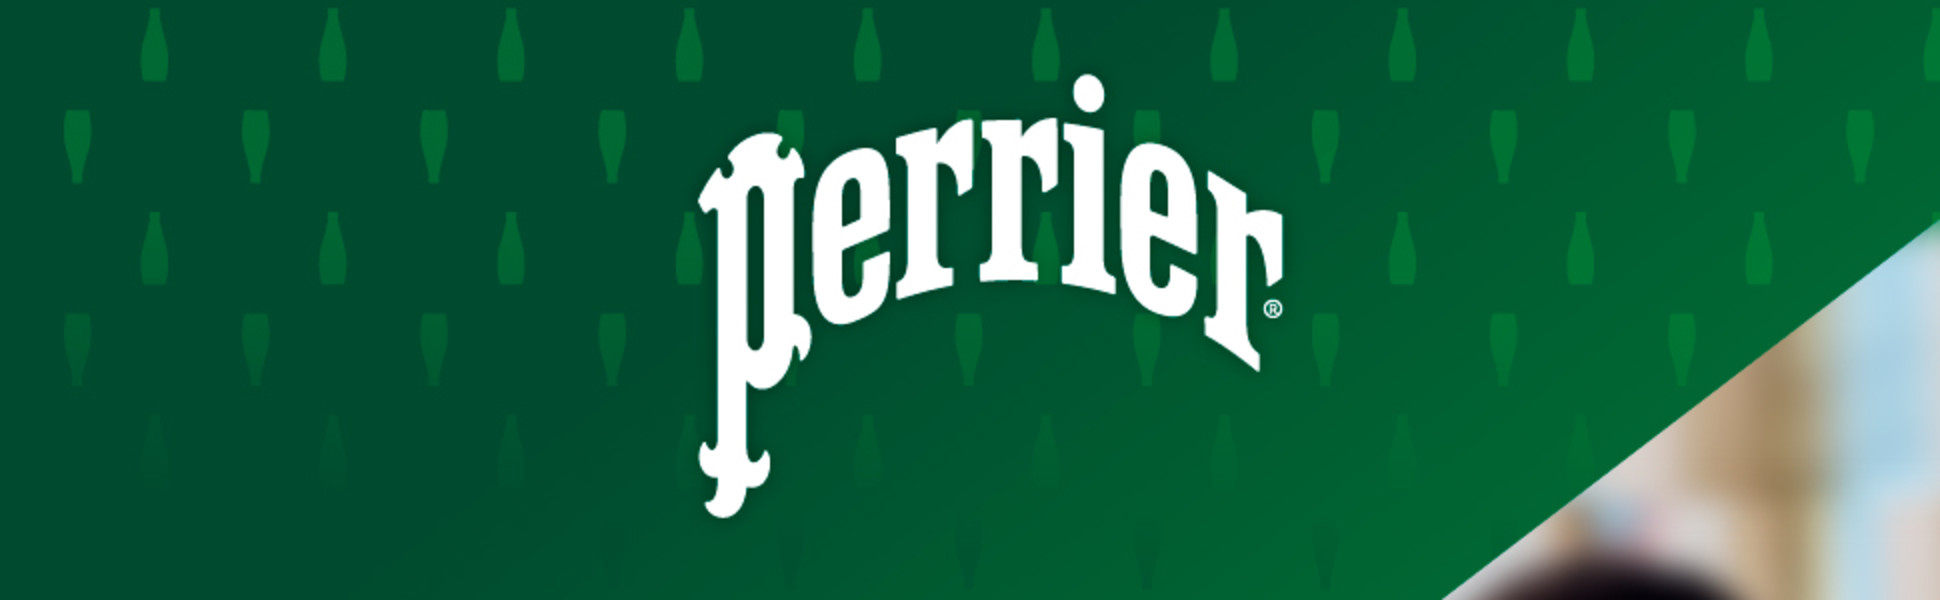 Perrier French sparkling mineral water